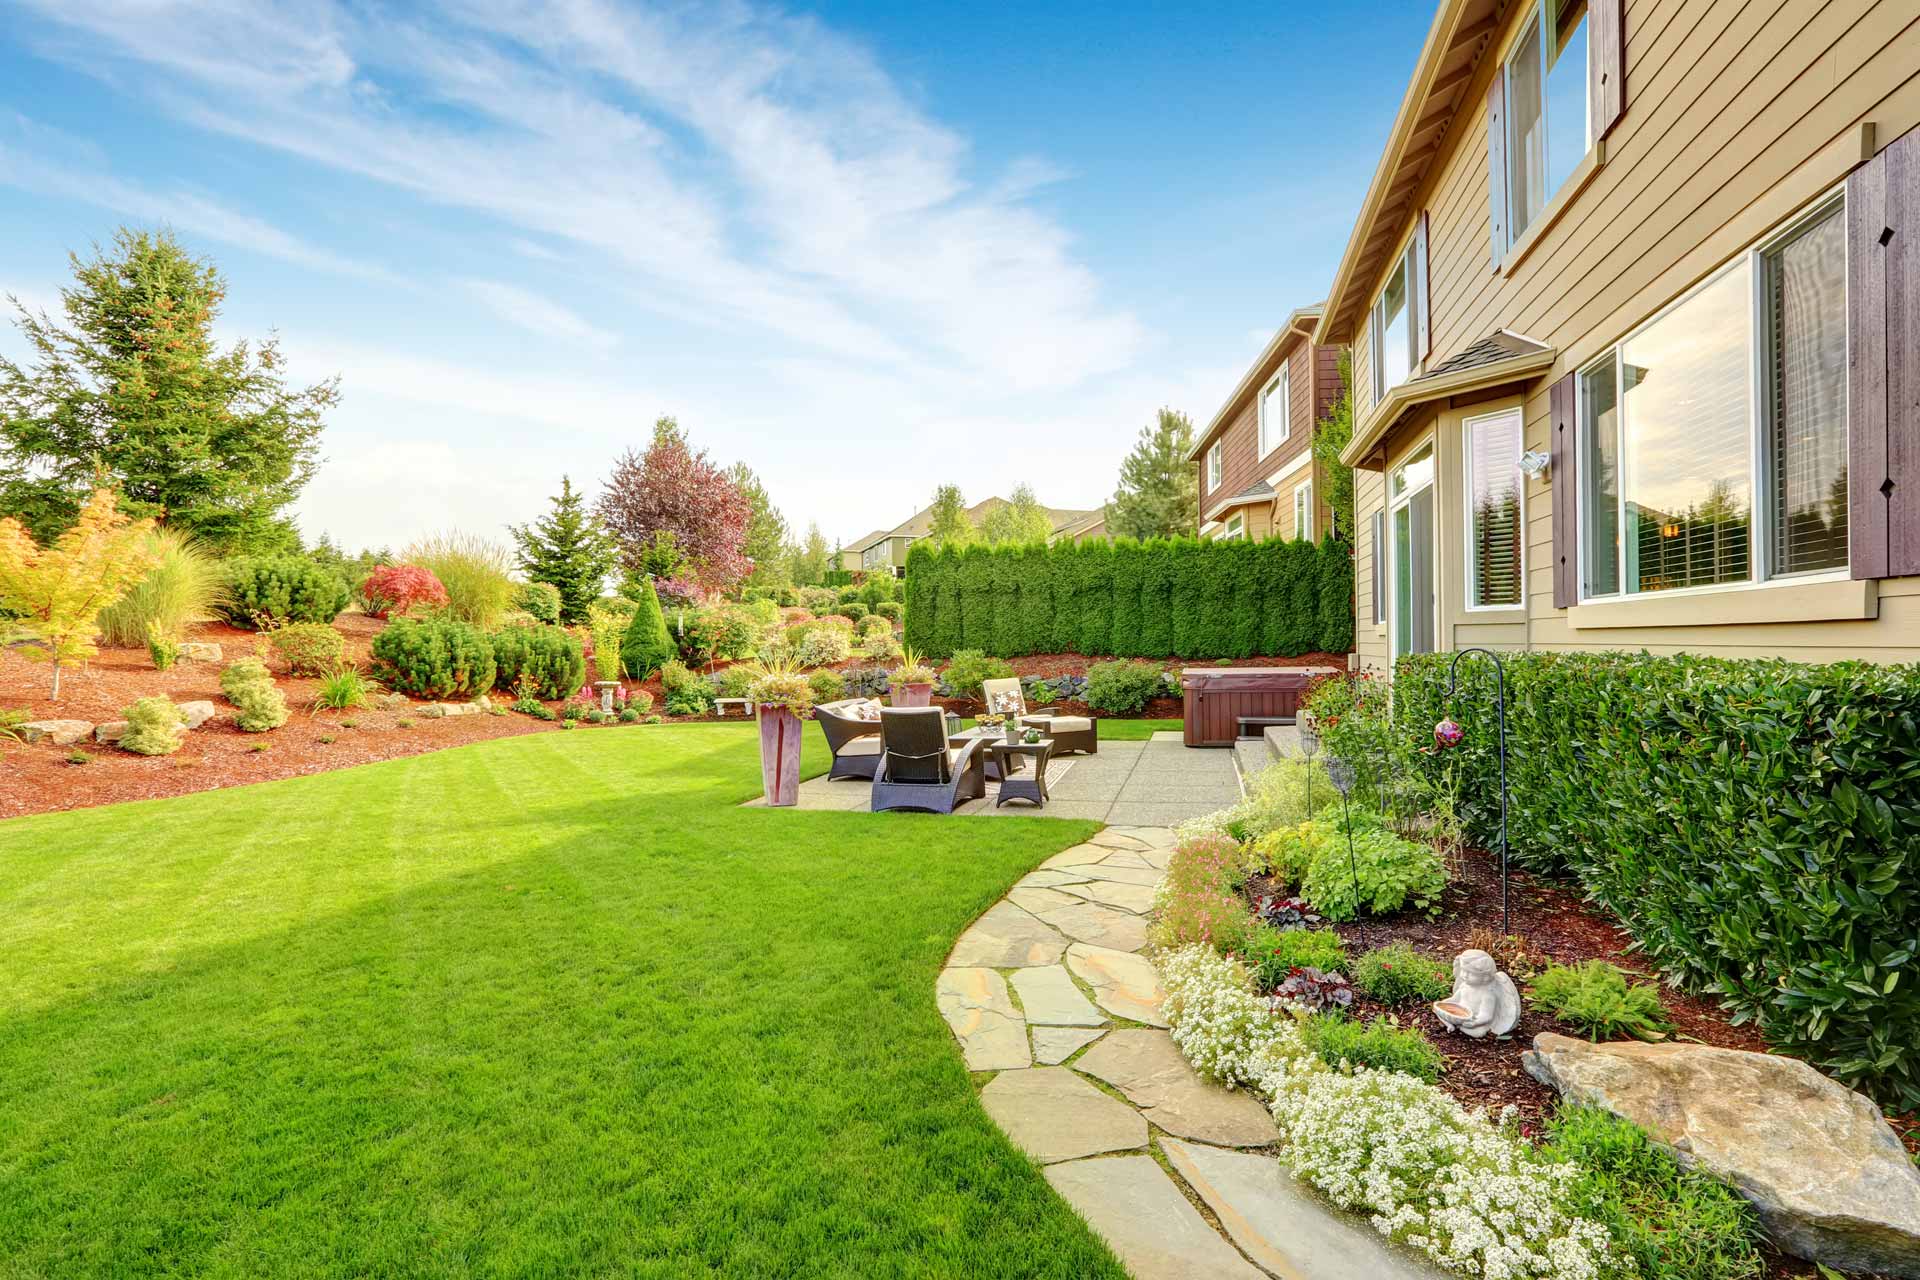 Best Landscaping & Hardscaping Service In Dubai​